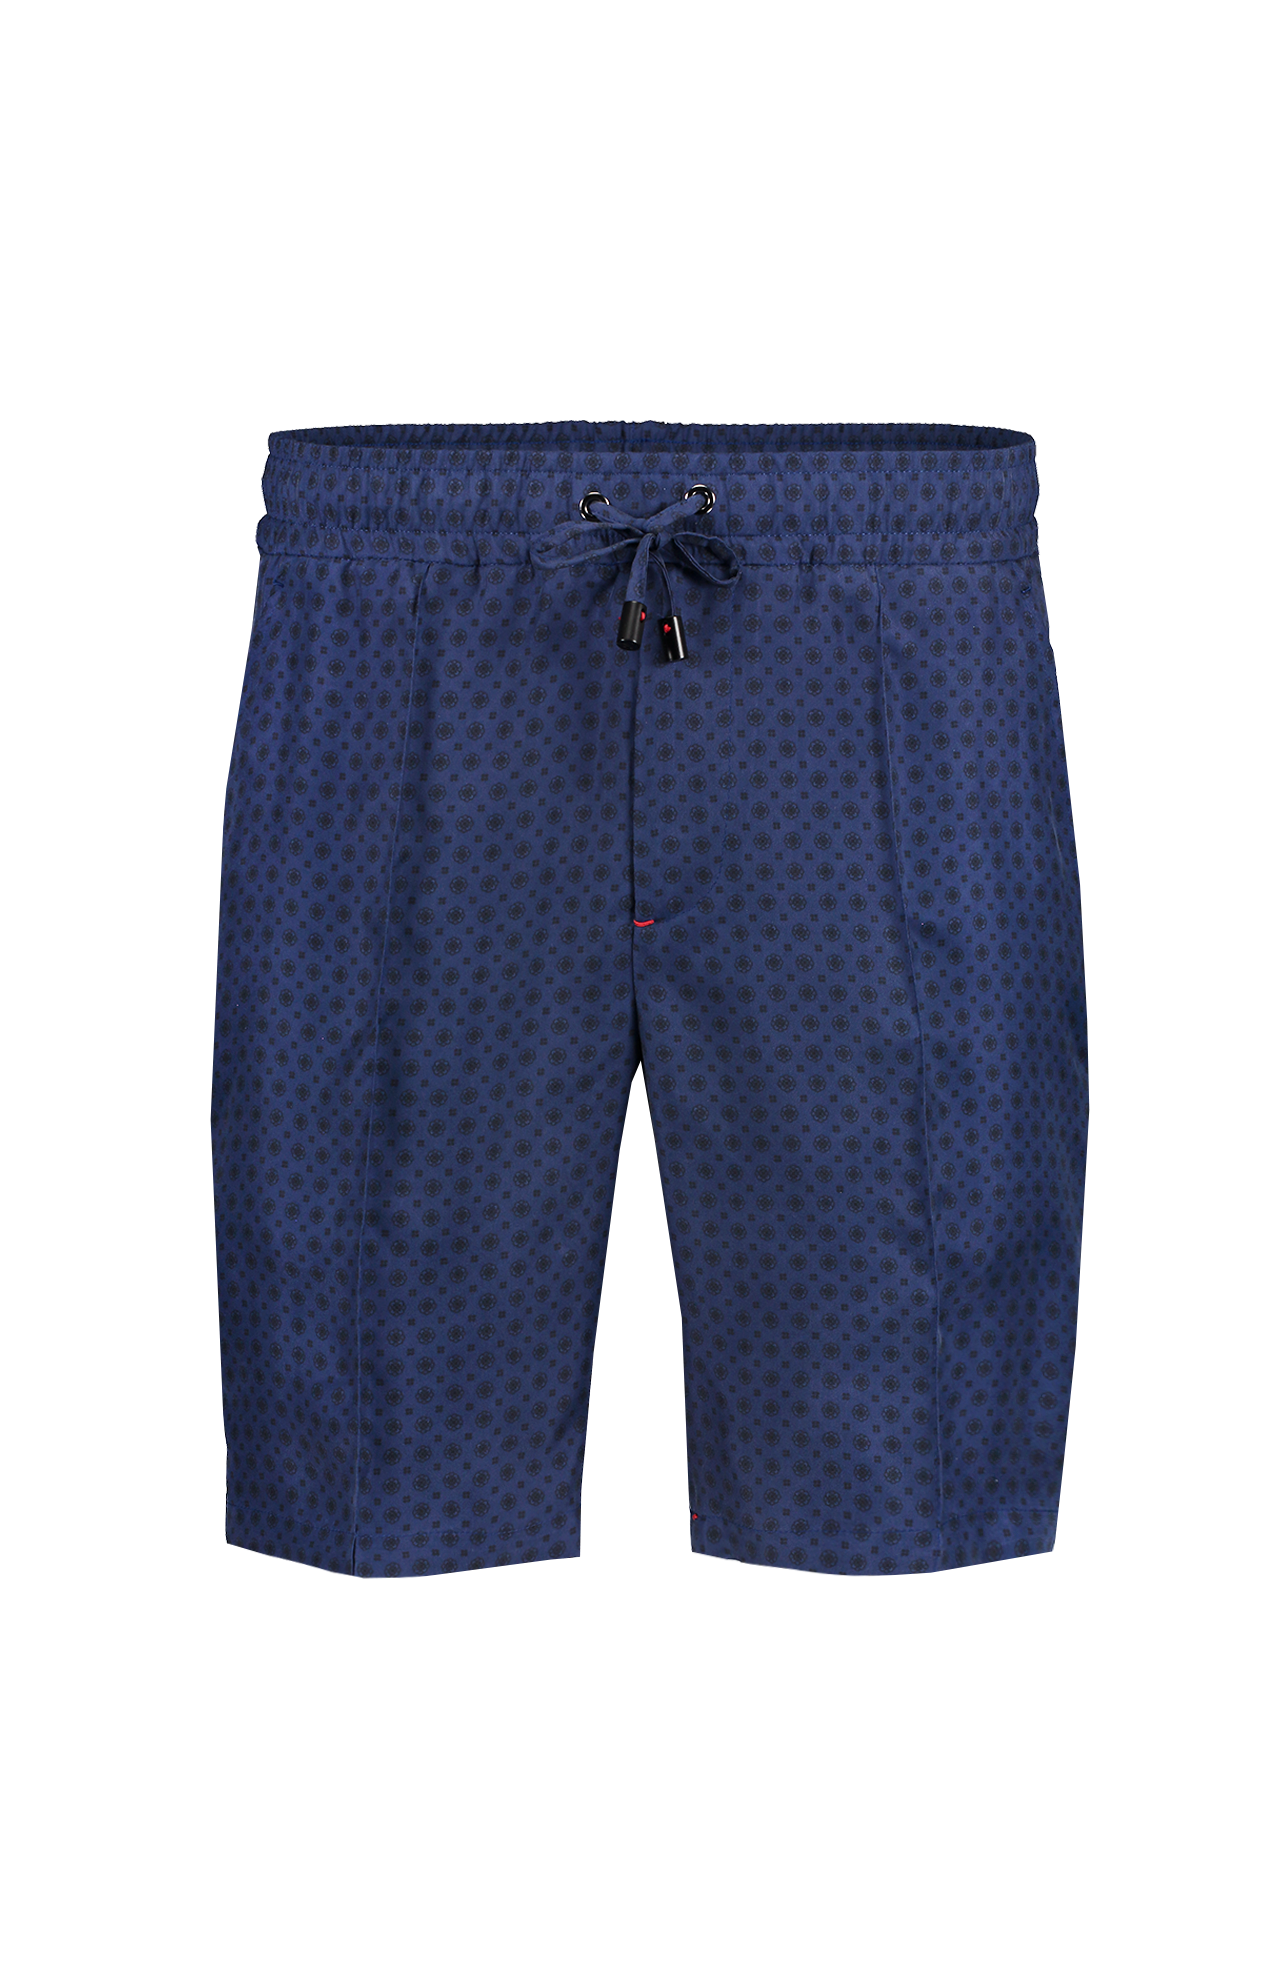 C.P. Company – Twill Stretch Utility Shorts Total Eclipse Blue